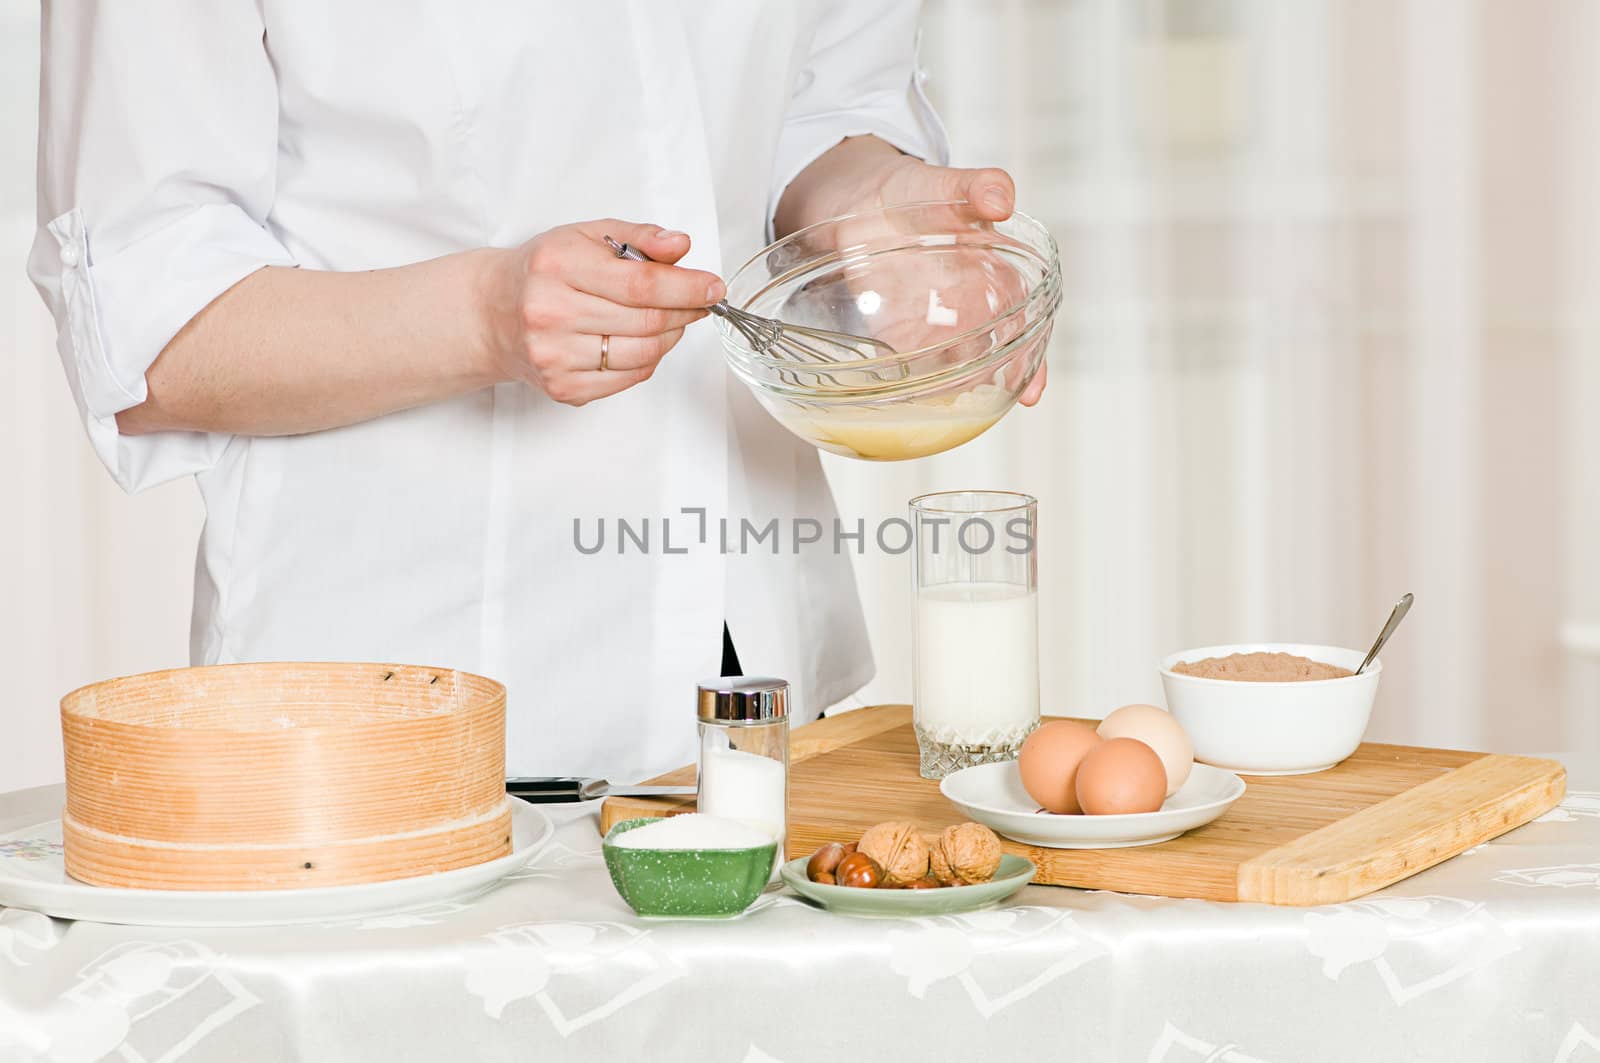 Preparation of food from eggs and other ingredients